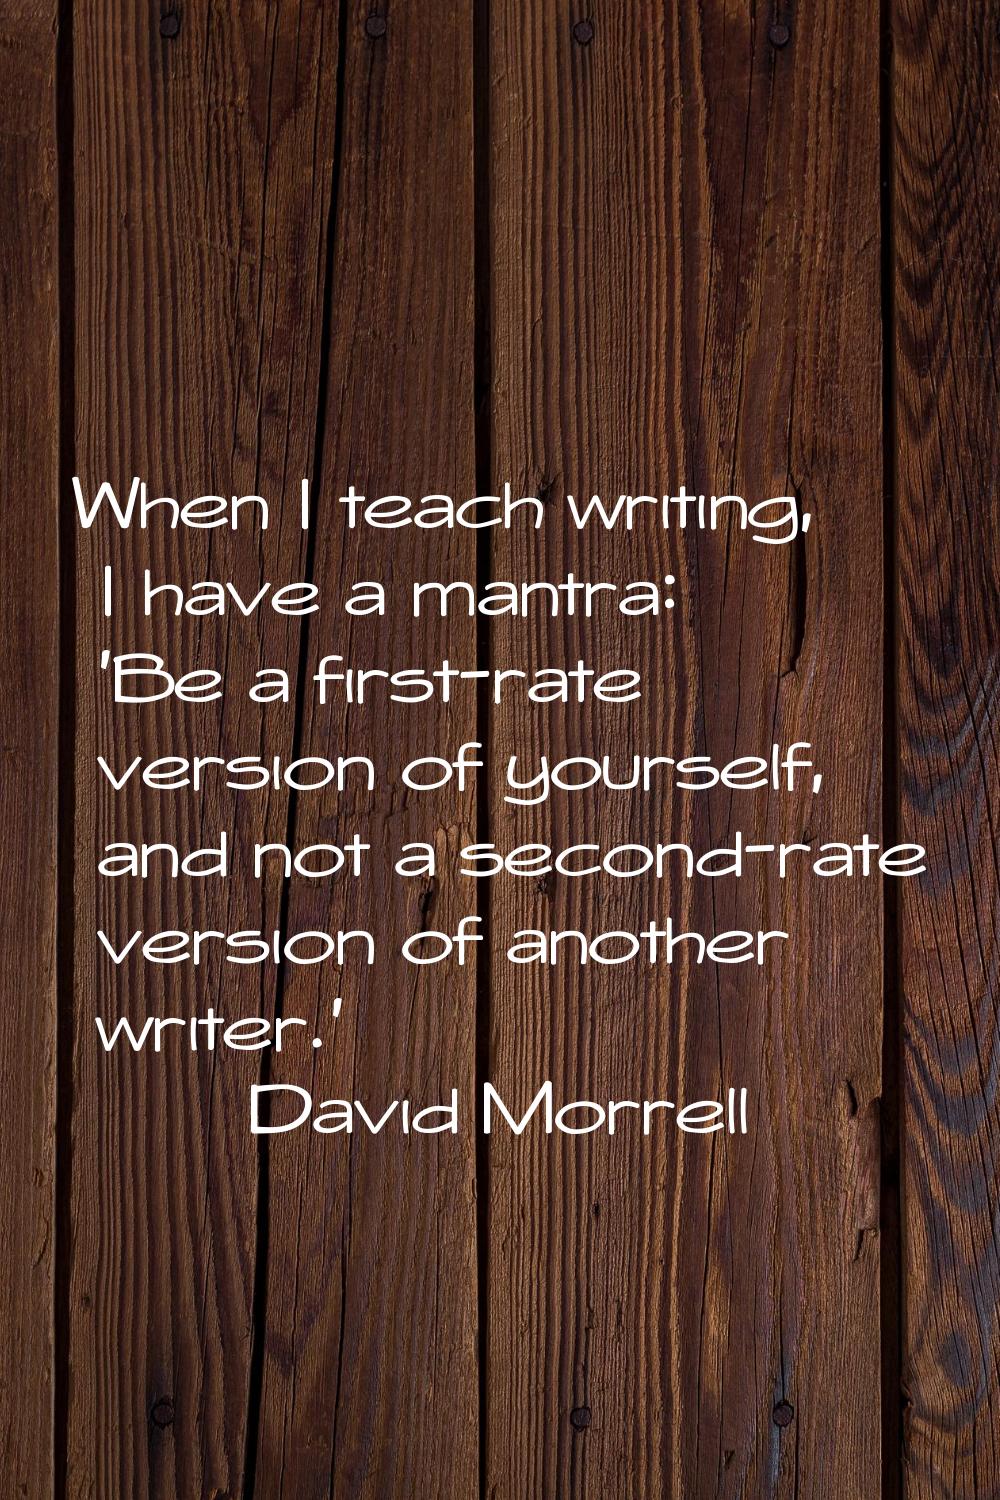 When I teach writing, I have a mantra: 'Be a first-rate version of yourself, and not a second-rate 